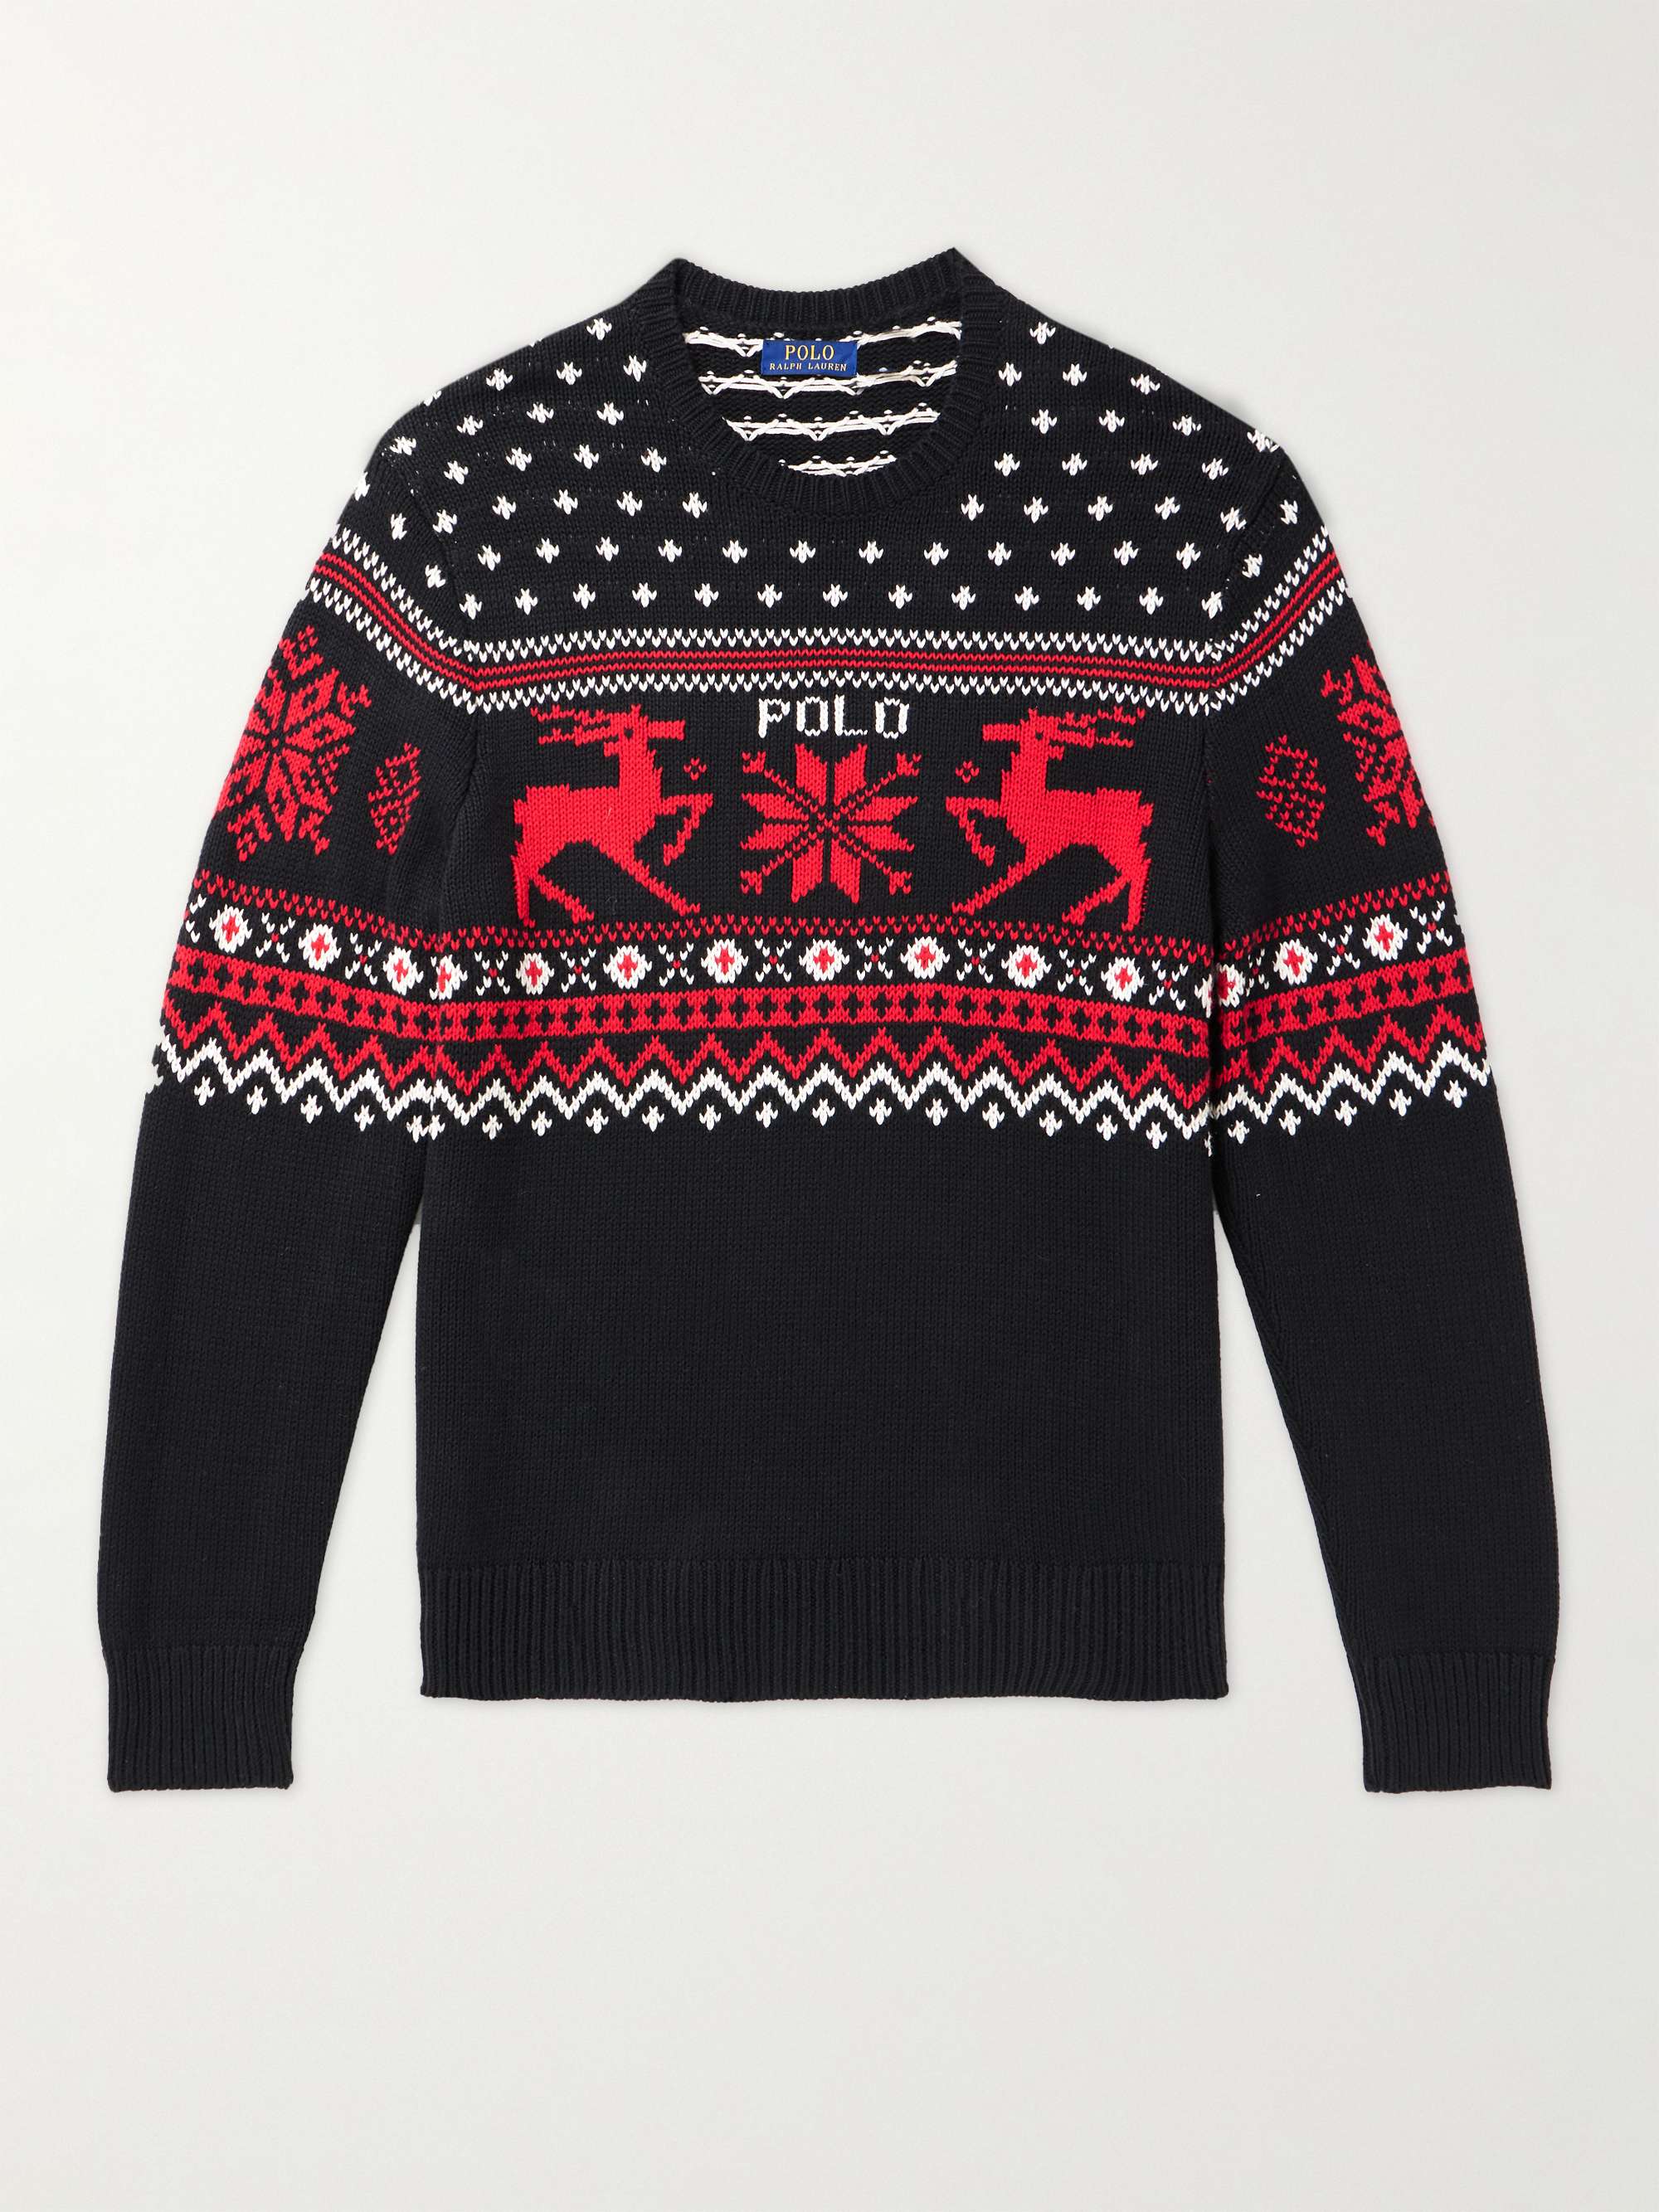 POLO RALPH LAUREN Fair Isle In Cotton and Cashmere-Blend Sweater,Black